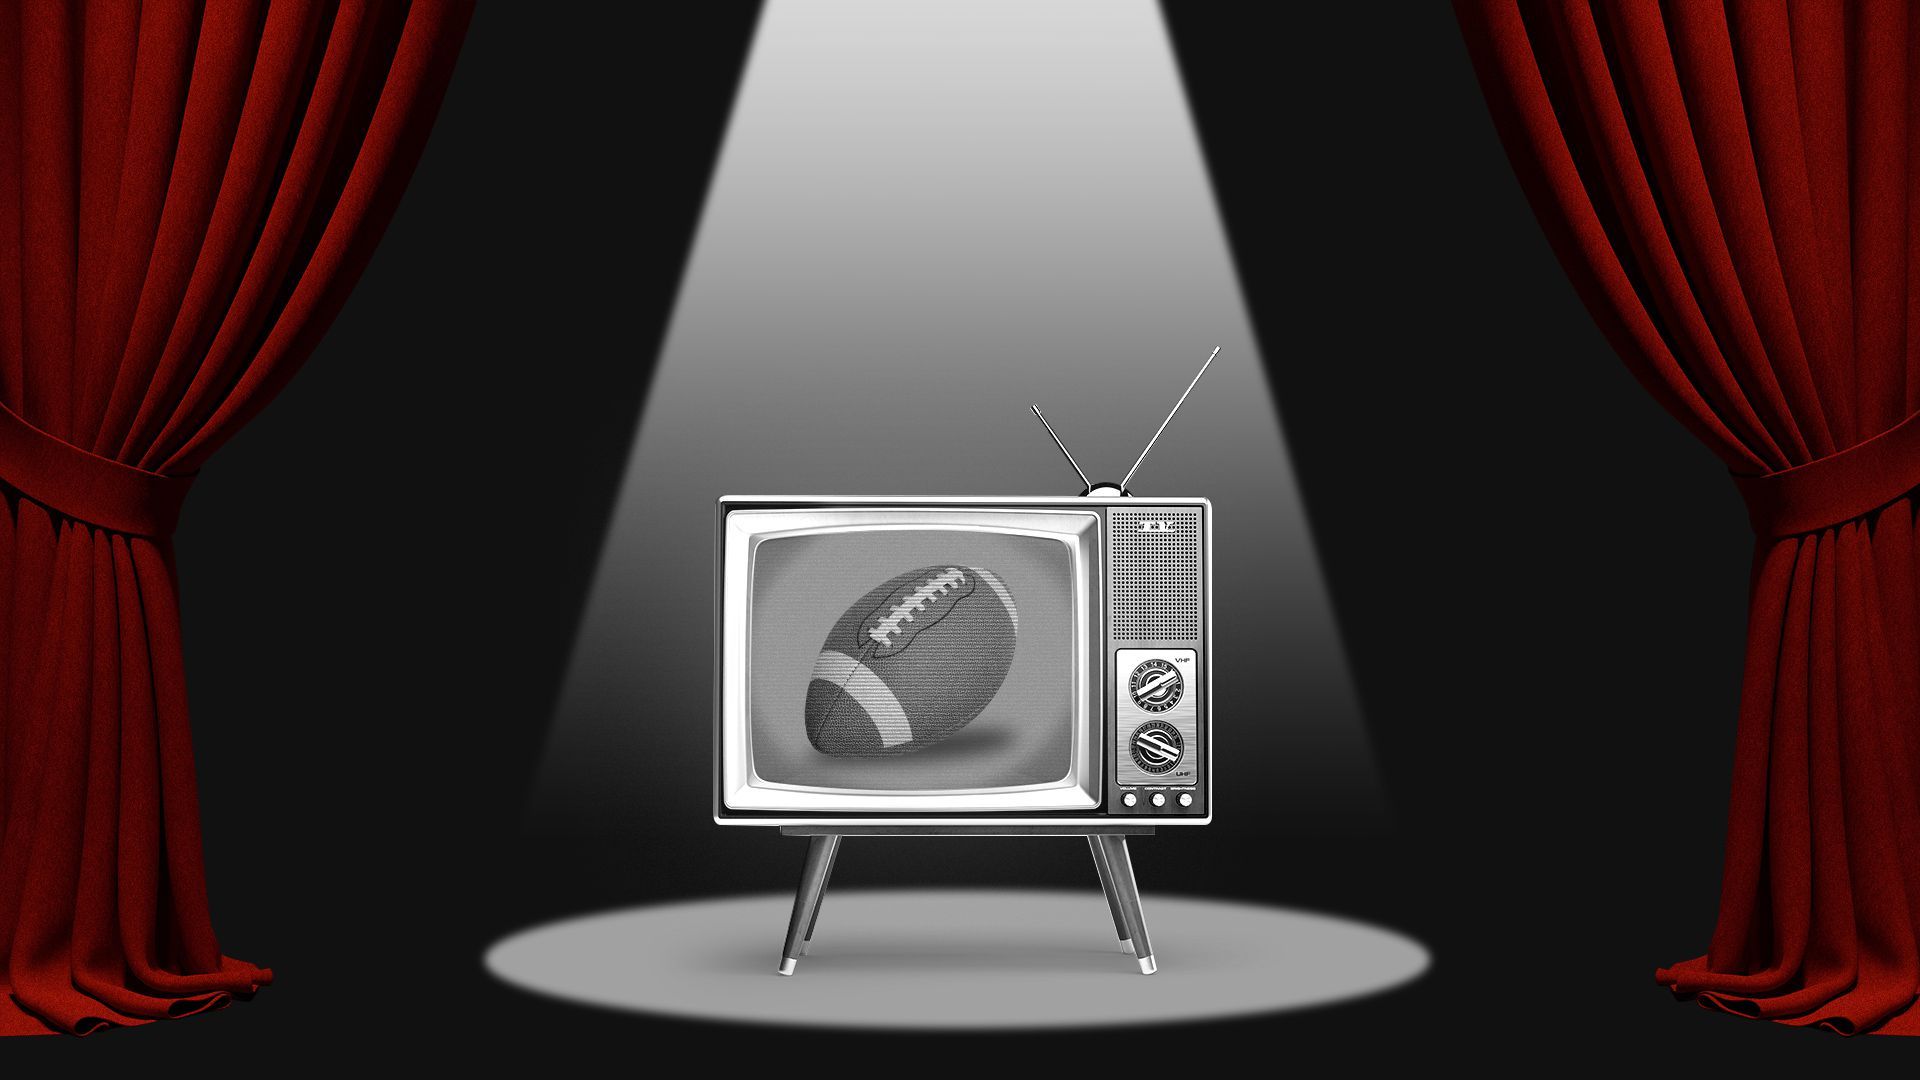 Illustration of a retro style TV showing a black and white image of a football on a curtained stage